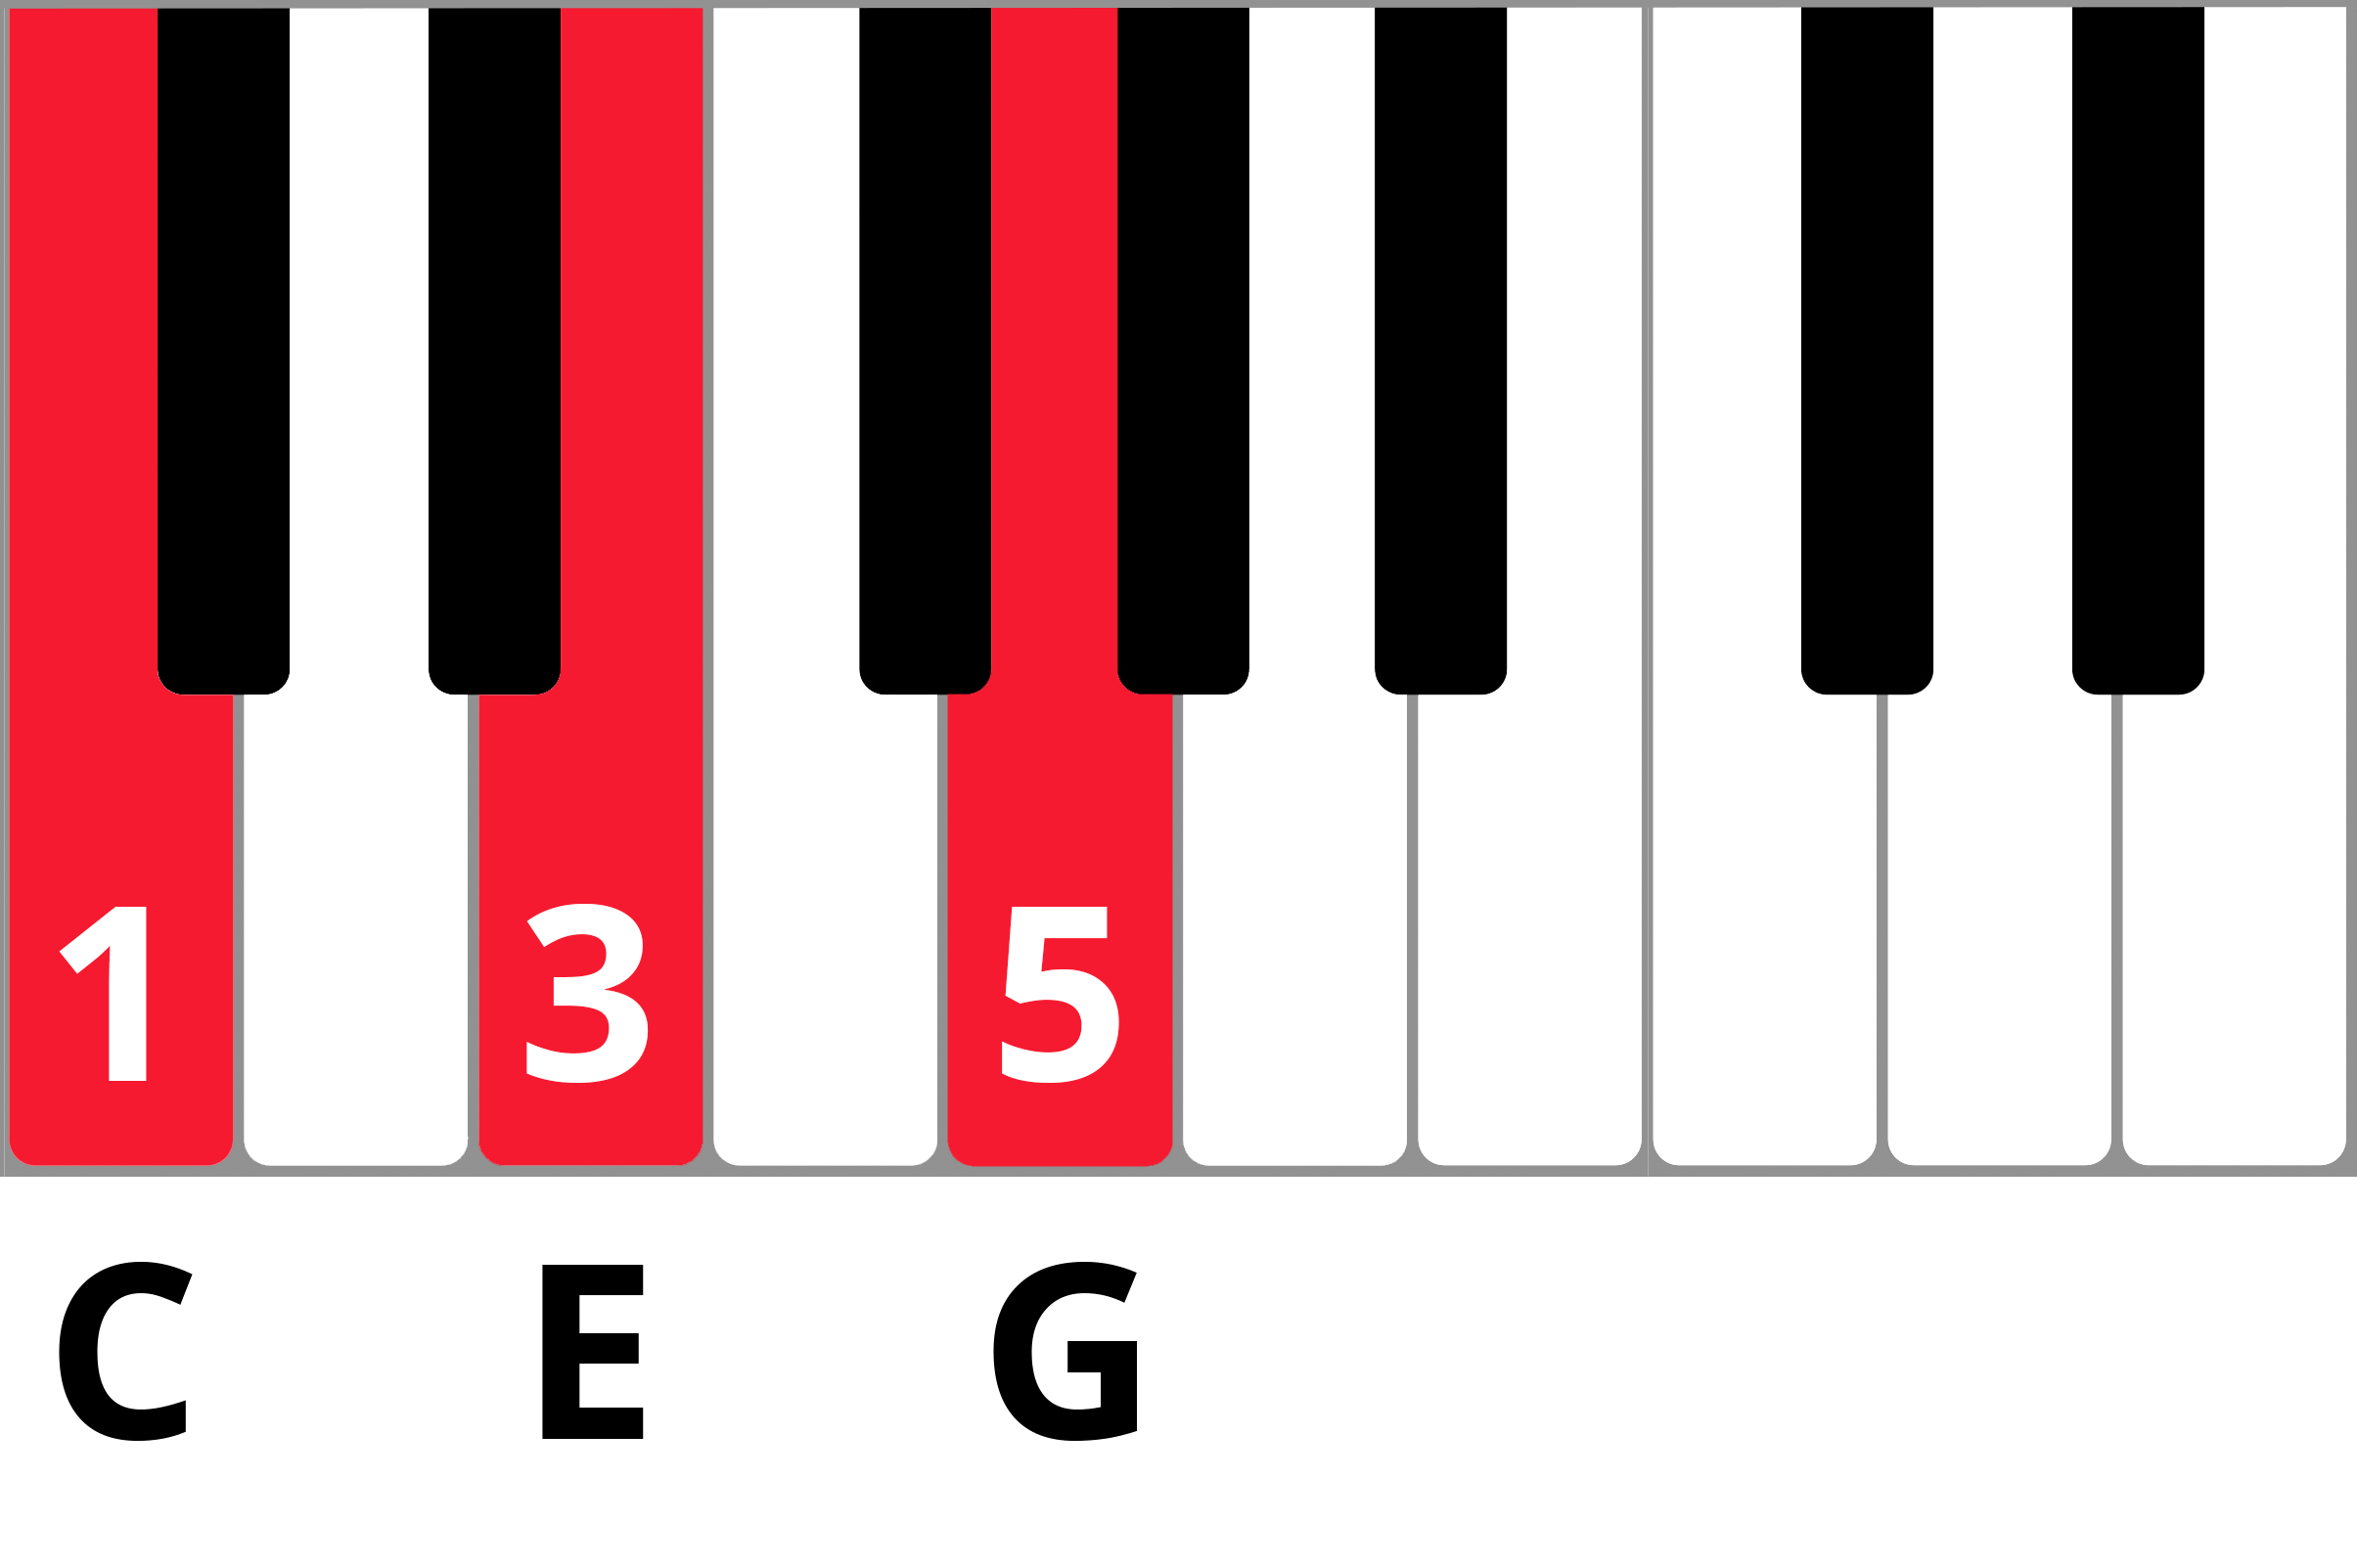 CEG chord highlighted in red on keyboard diagram with fingering 135.